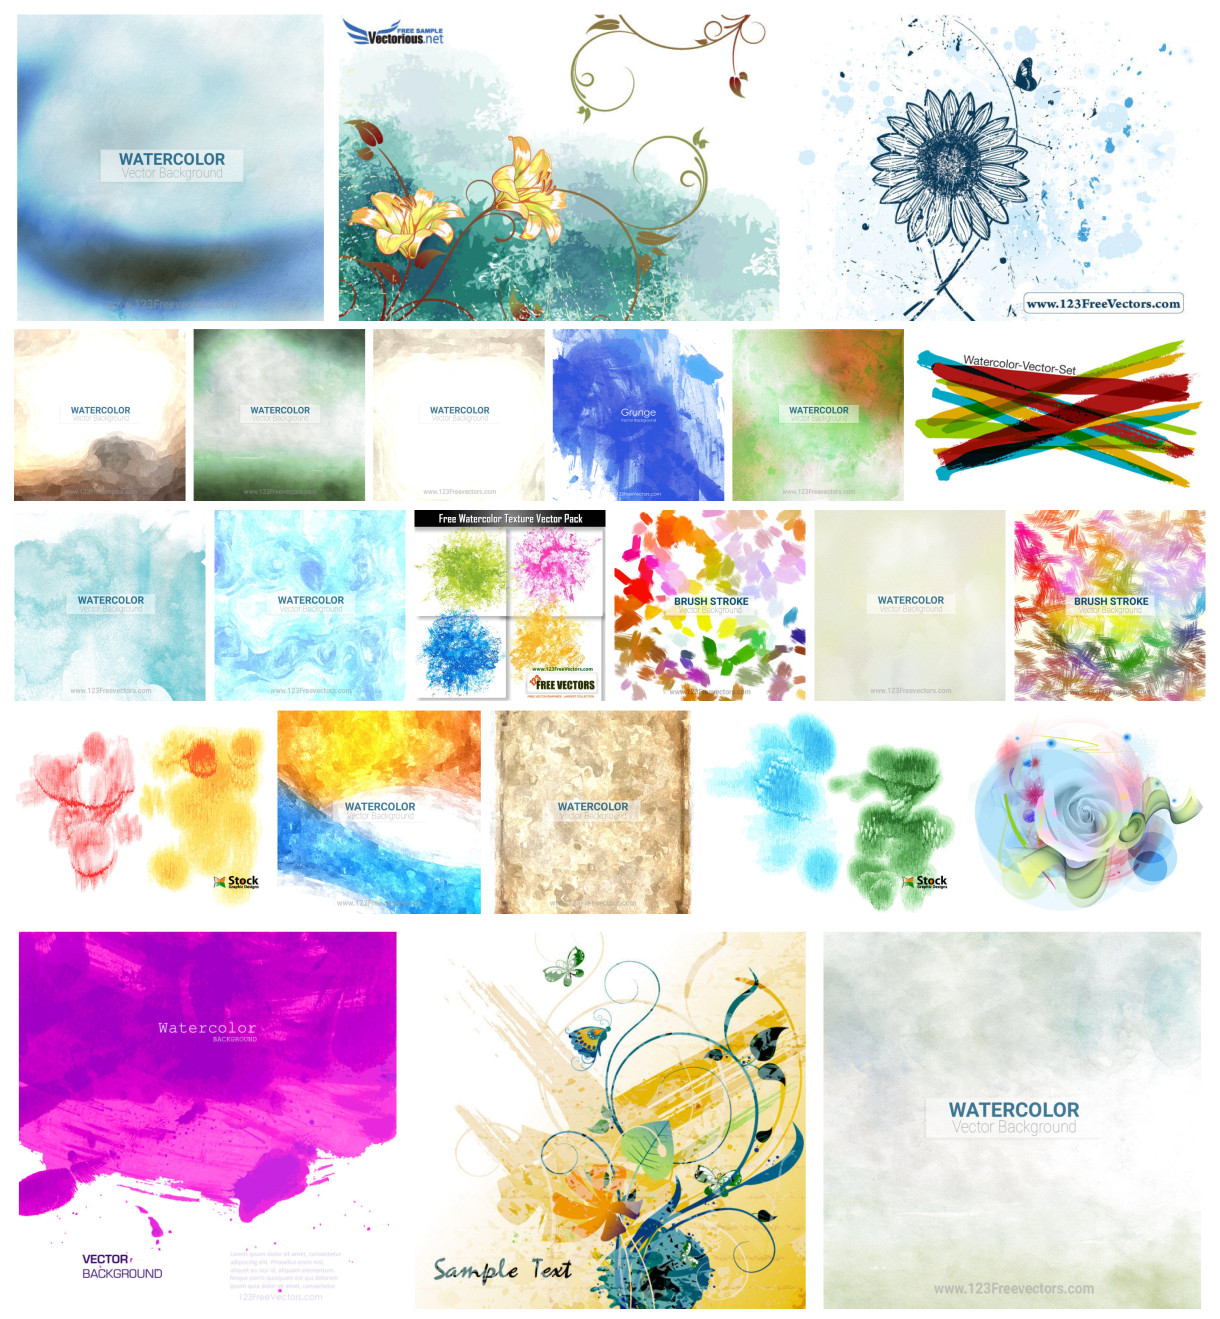 A Spectrum of Watercolor Vector Designs: From Abstract to Floral